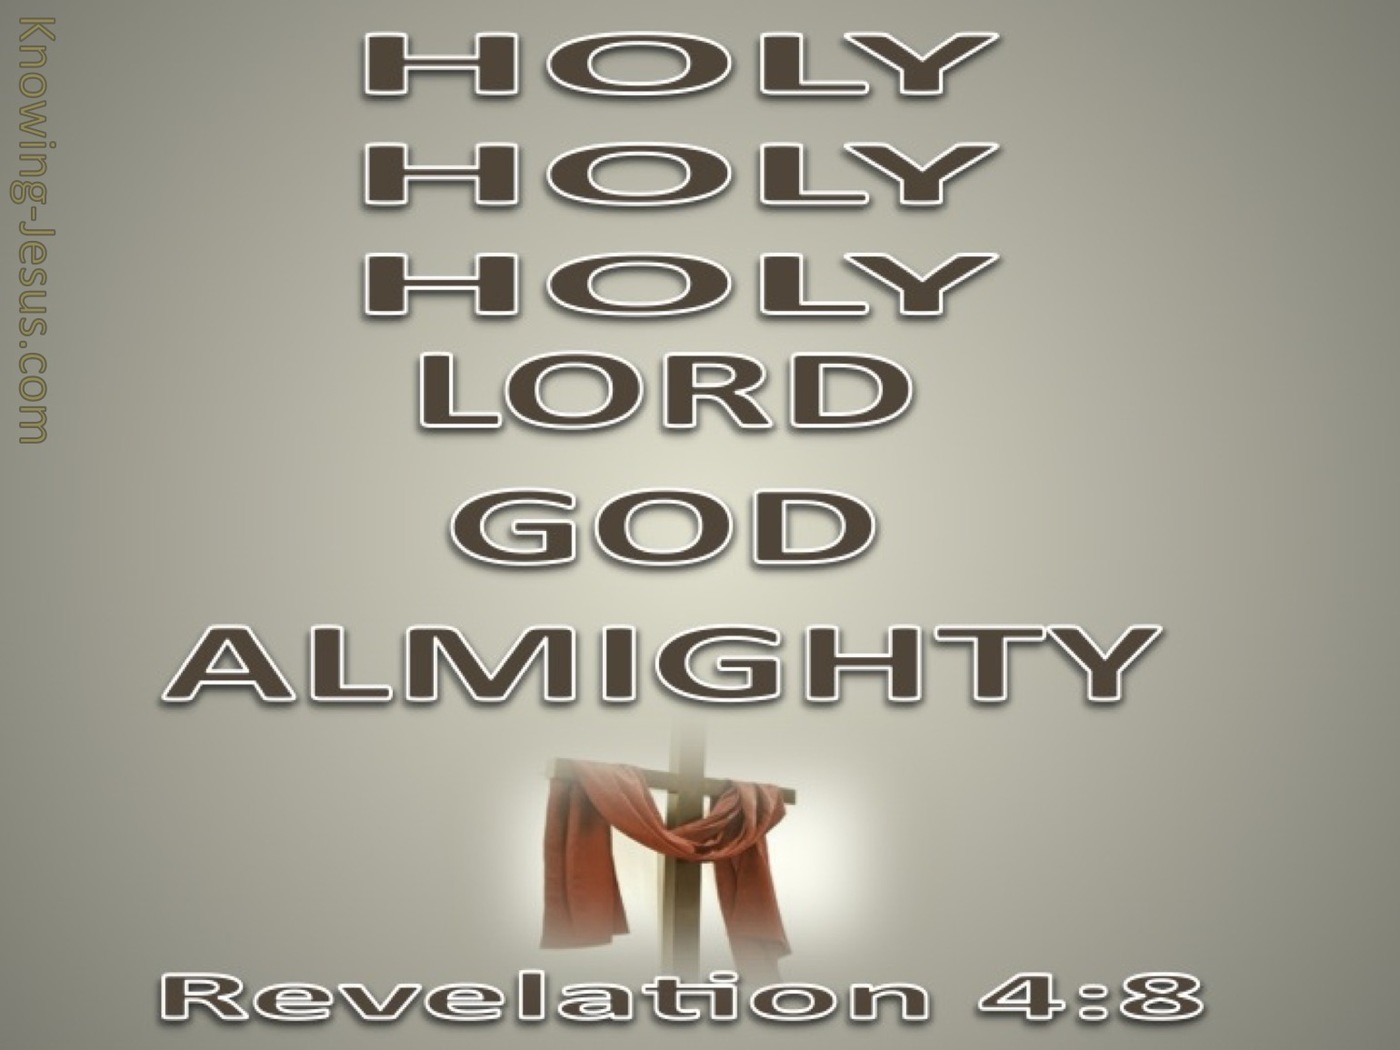 Revelation 4:8 Holy, Holy, Holy Lord God Almighty (brown)